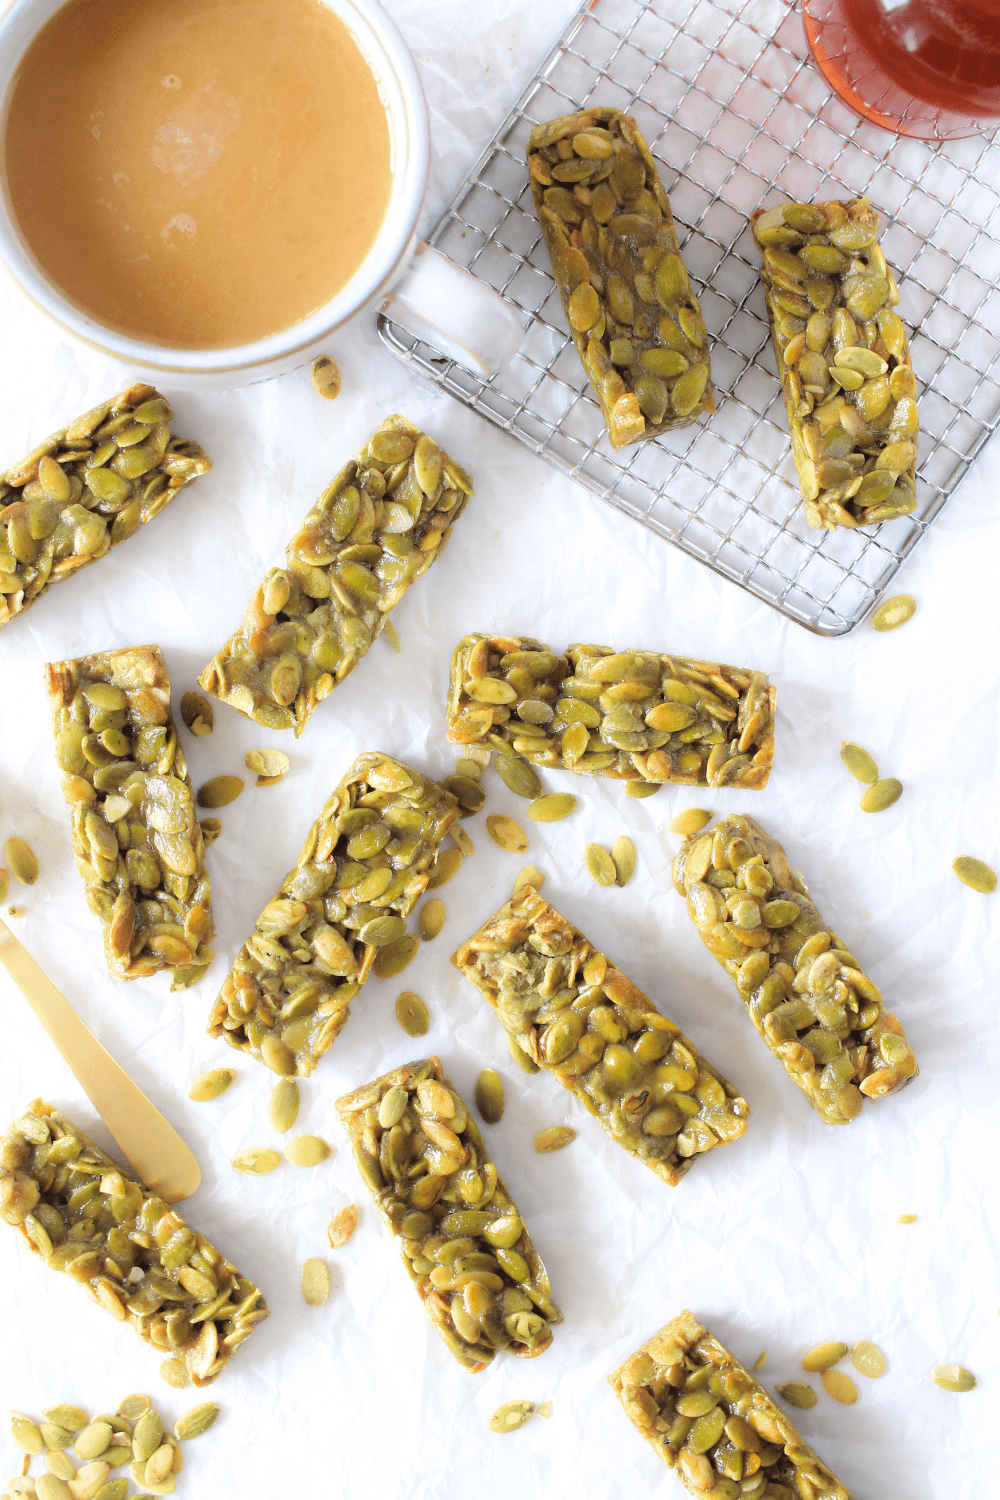 sugar-free protein bars made with pumpkin seeds scattered with a cup of coffee and sugar-free syrup